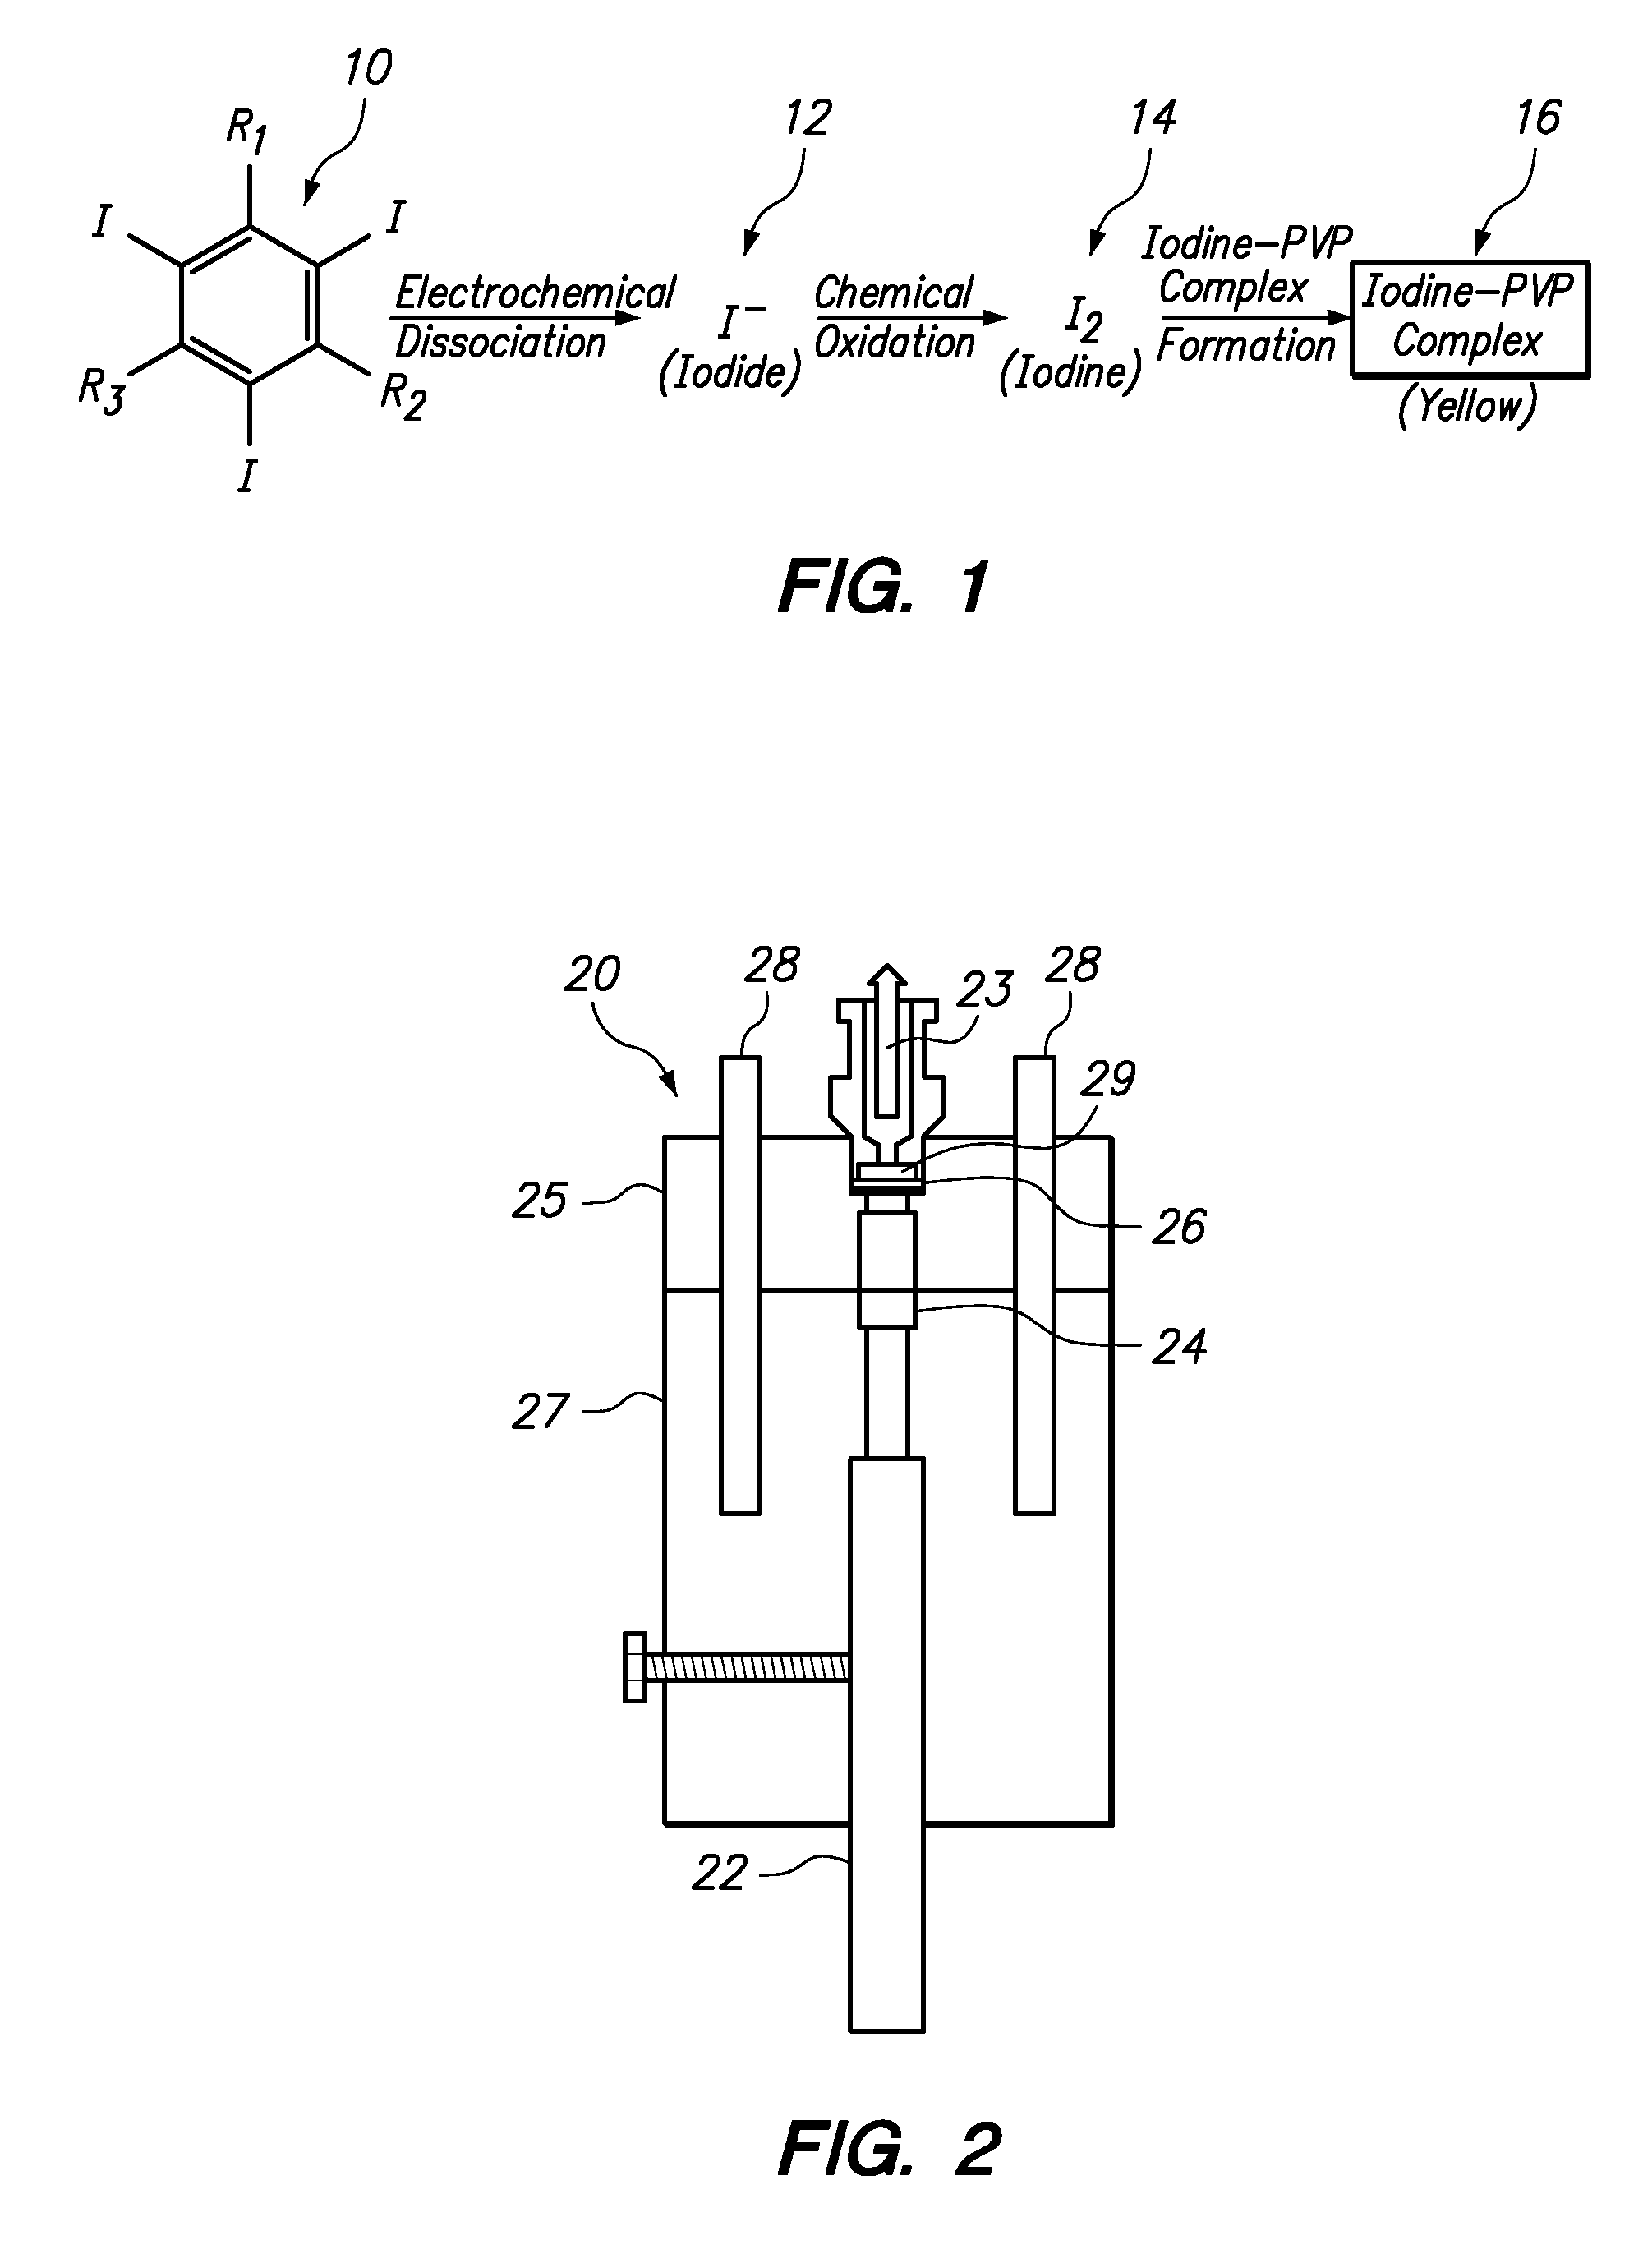 Apparatus and method for determining the concentration of iodine-containing organic compounds in an aqueous solution